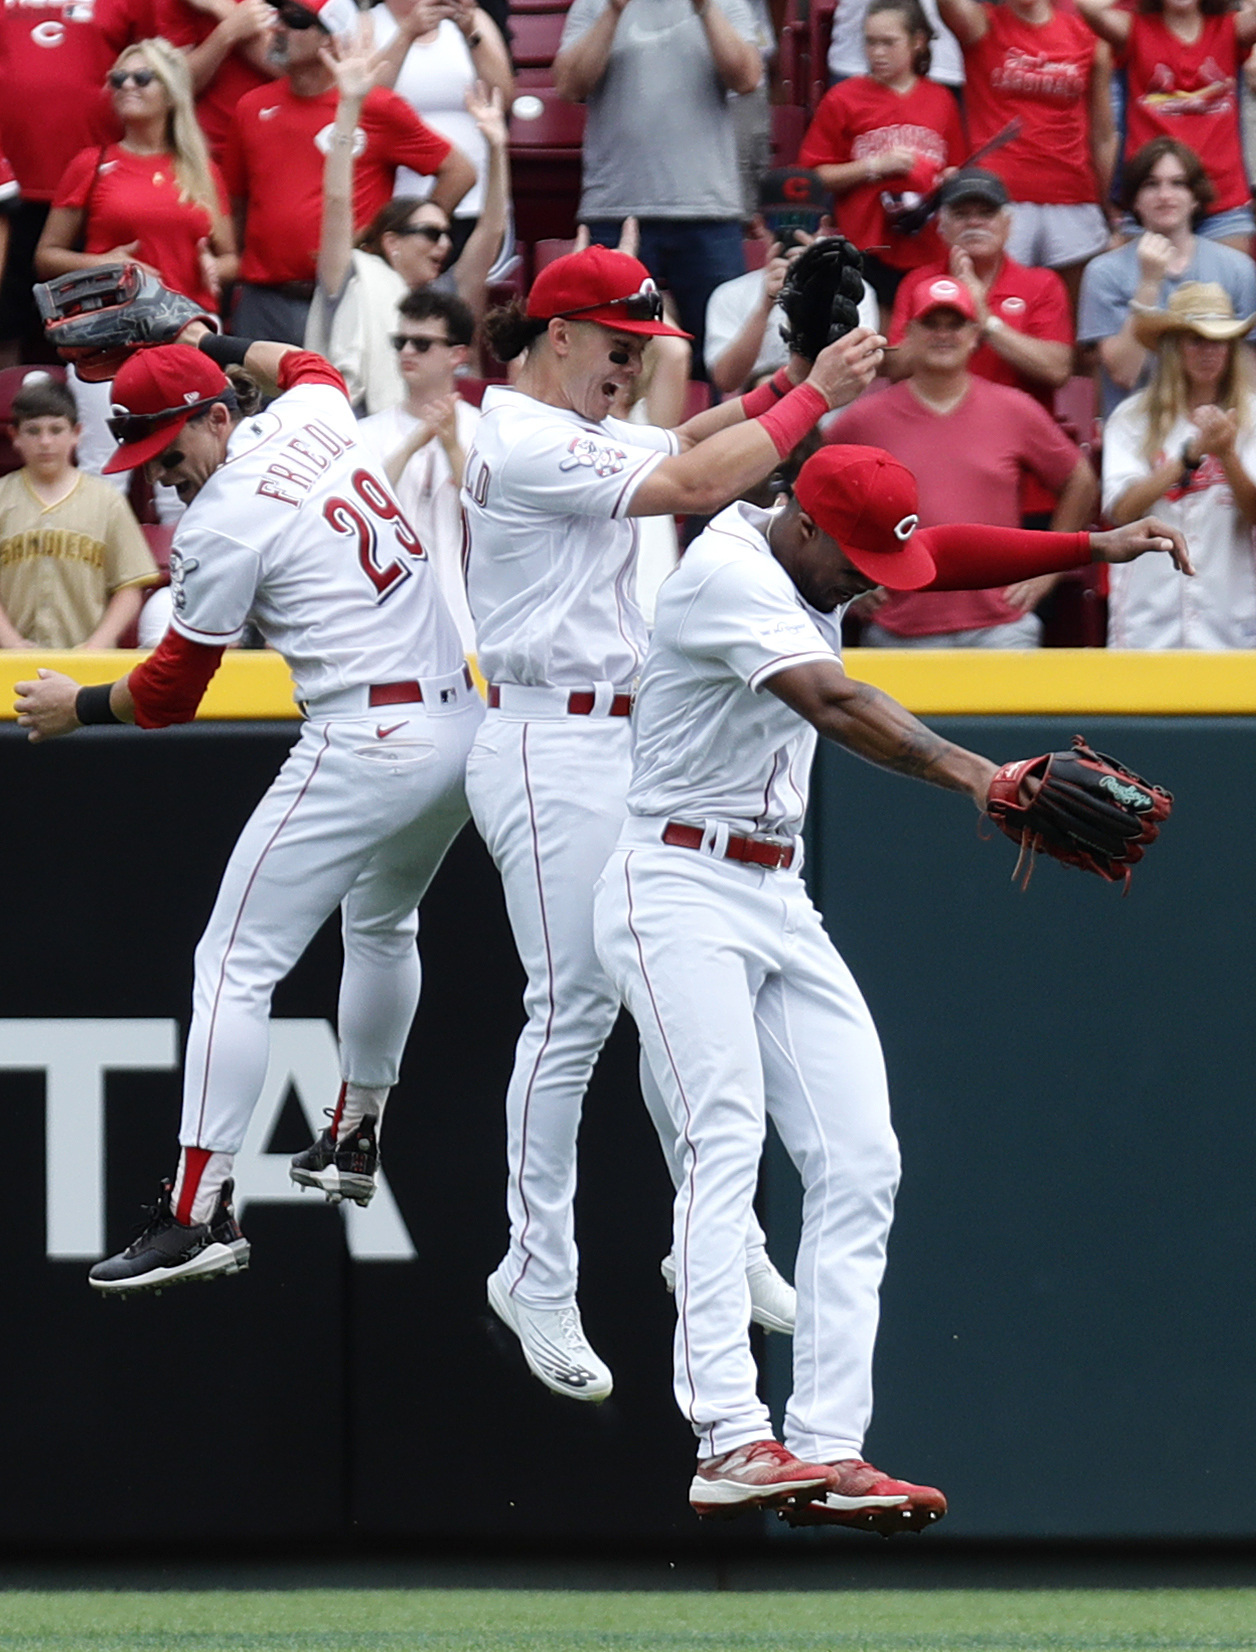 Tyler Stephenson's blast lifts Reds over Padres